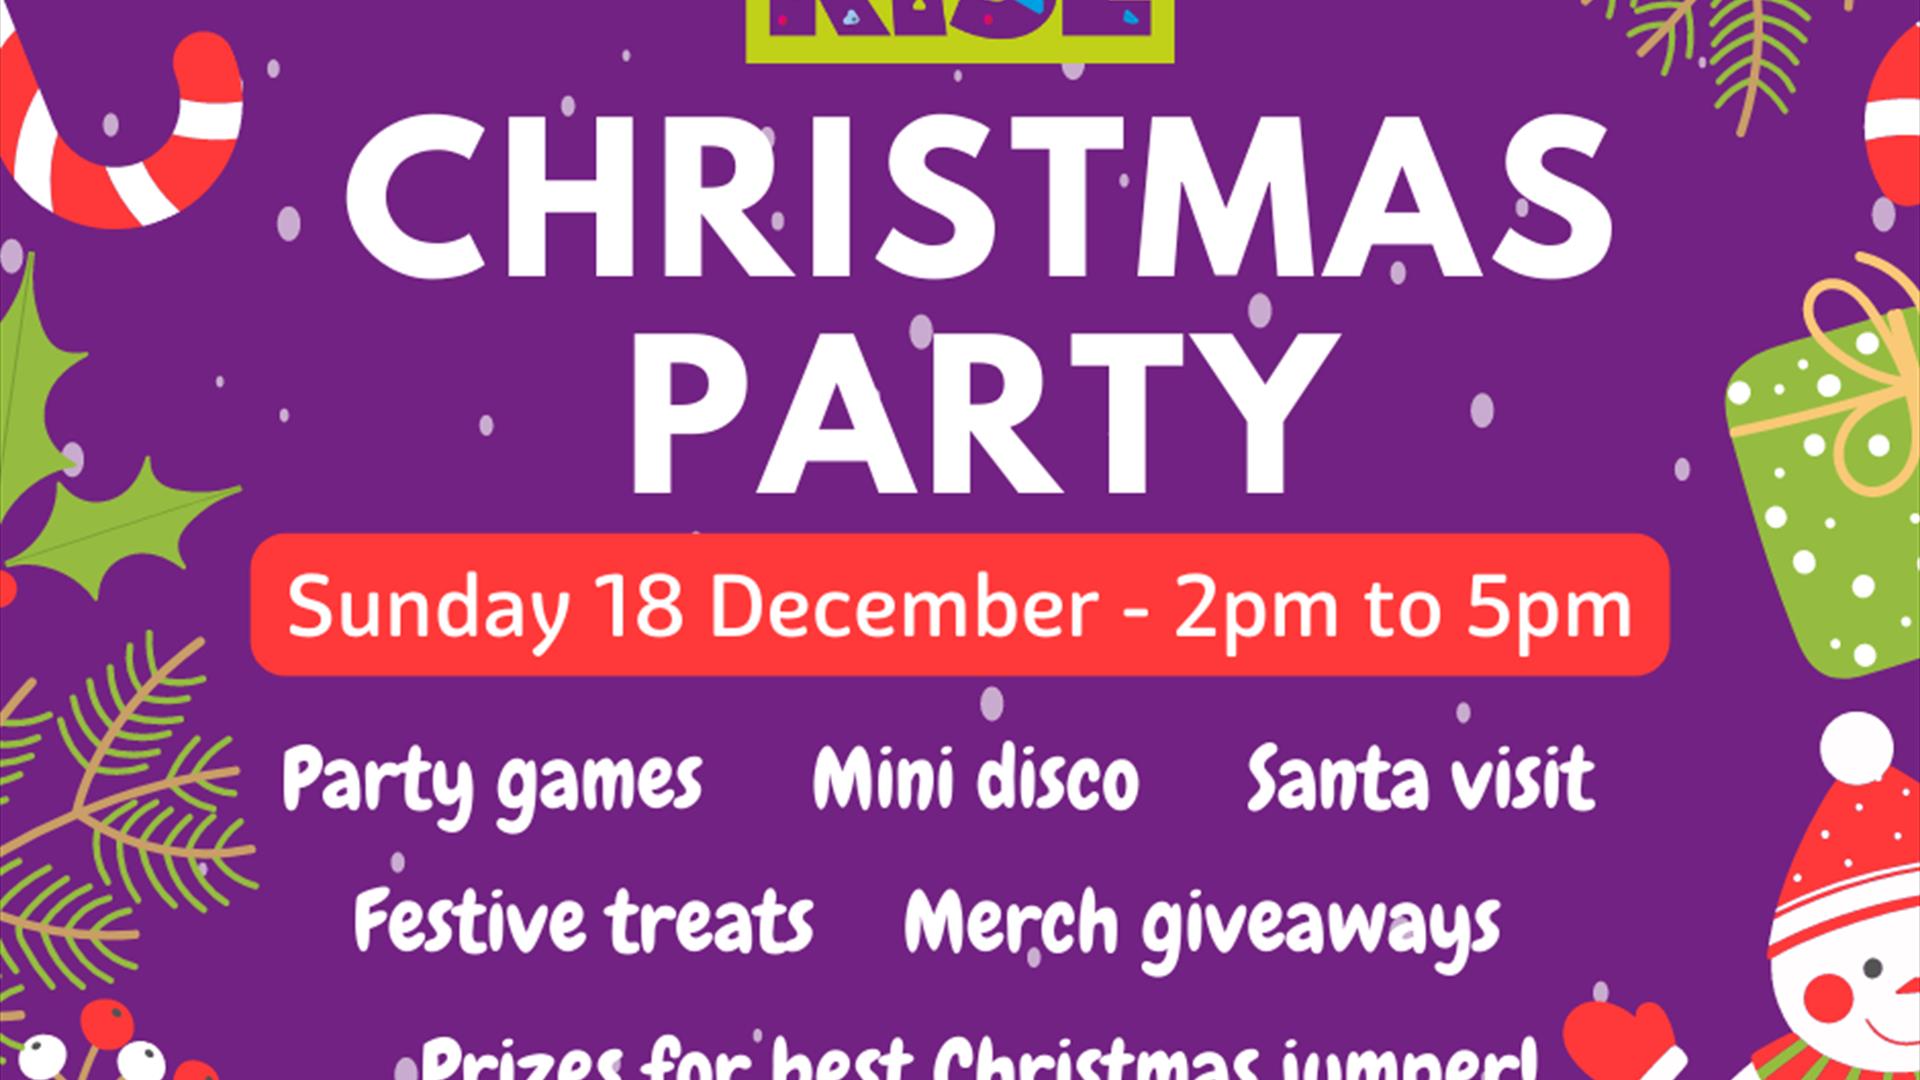 A poster with High Rise Christmas party showing text indicating Sunday 18 December 2pm-5pm